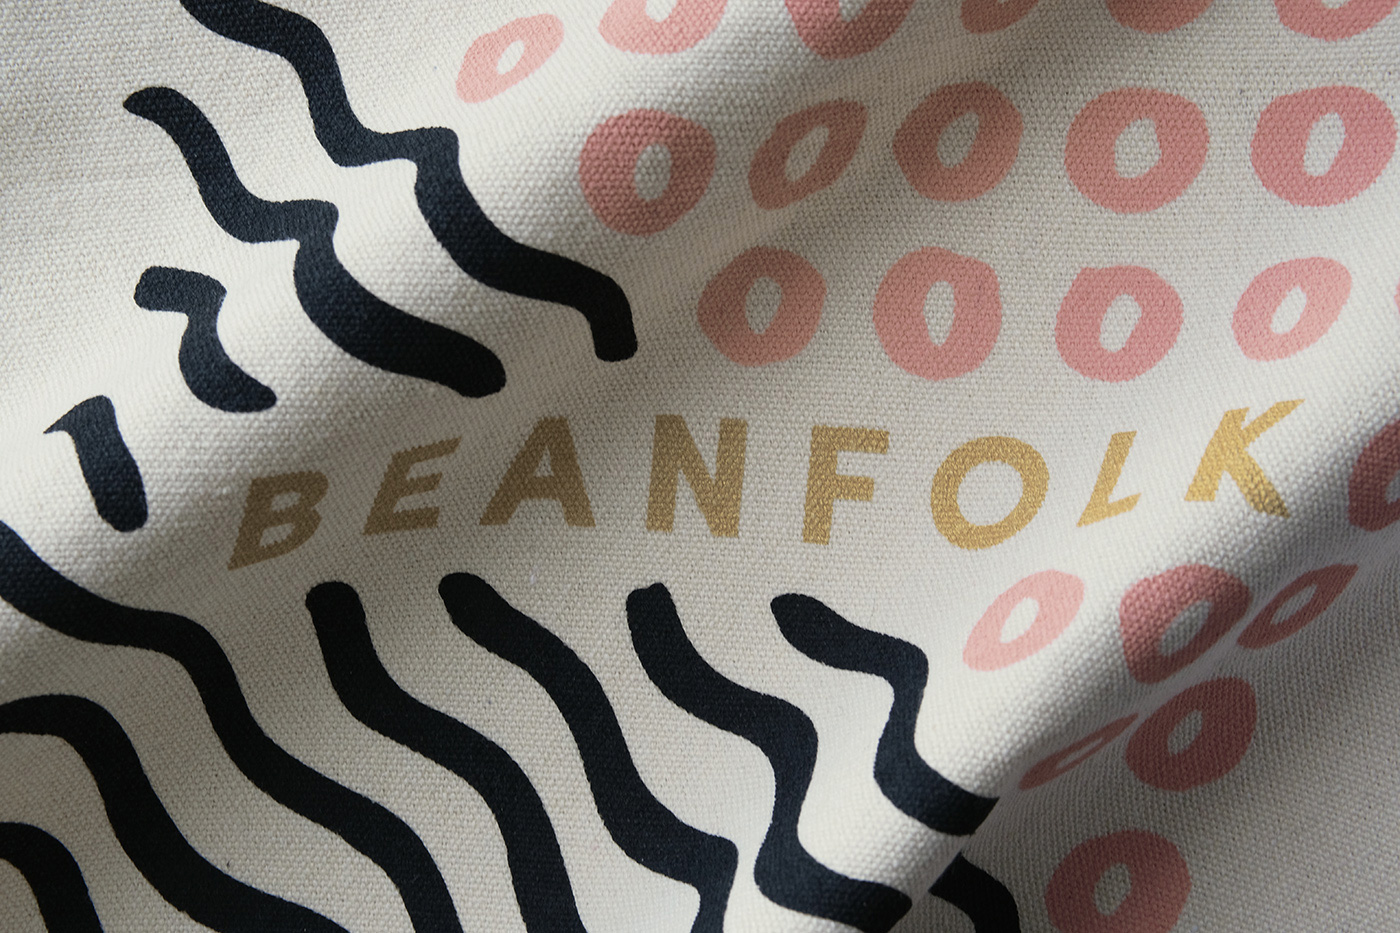 New Logo, Identity, and Packaging for Beanfolk by Outfit